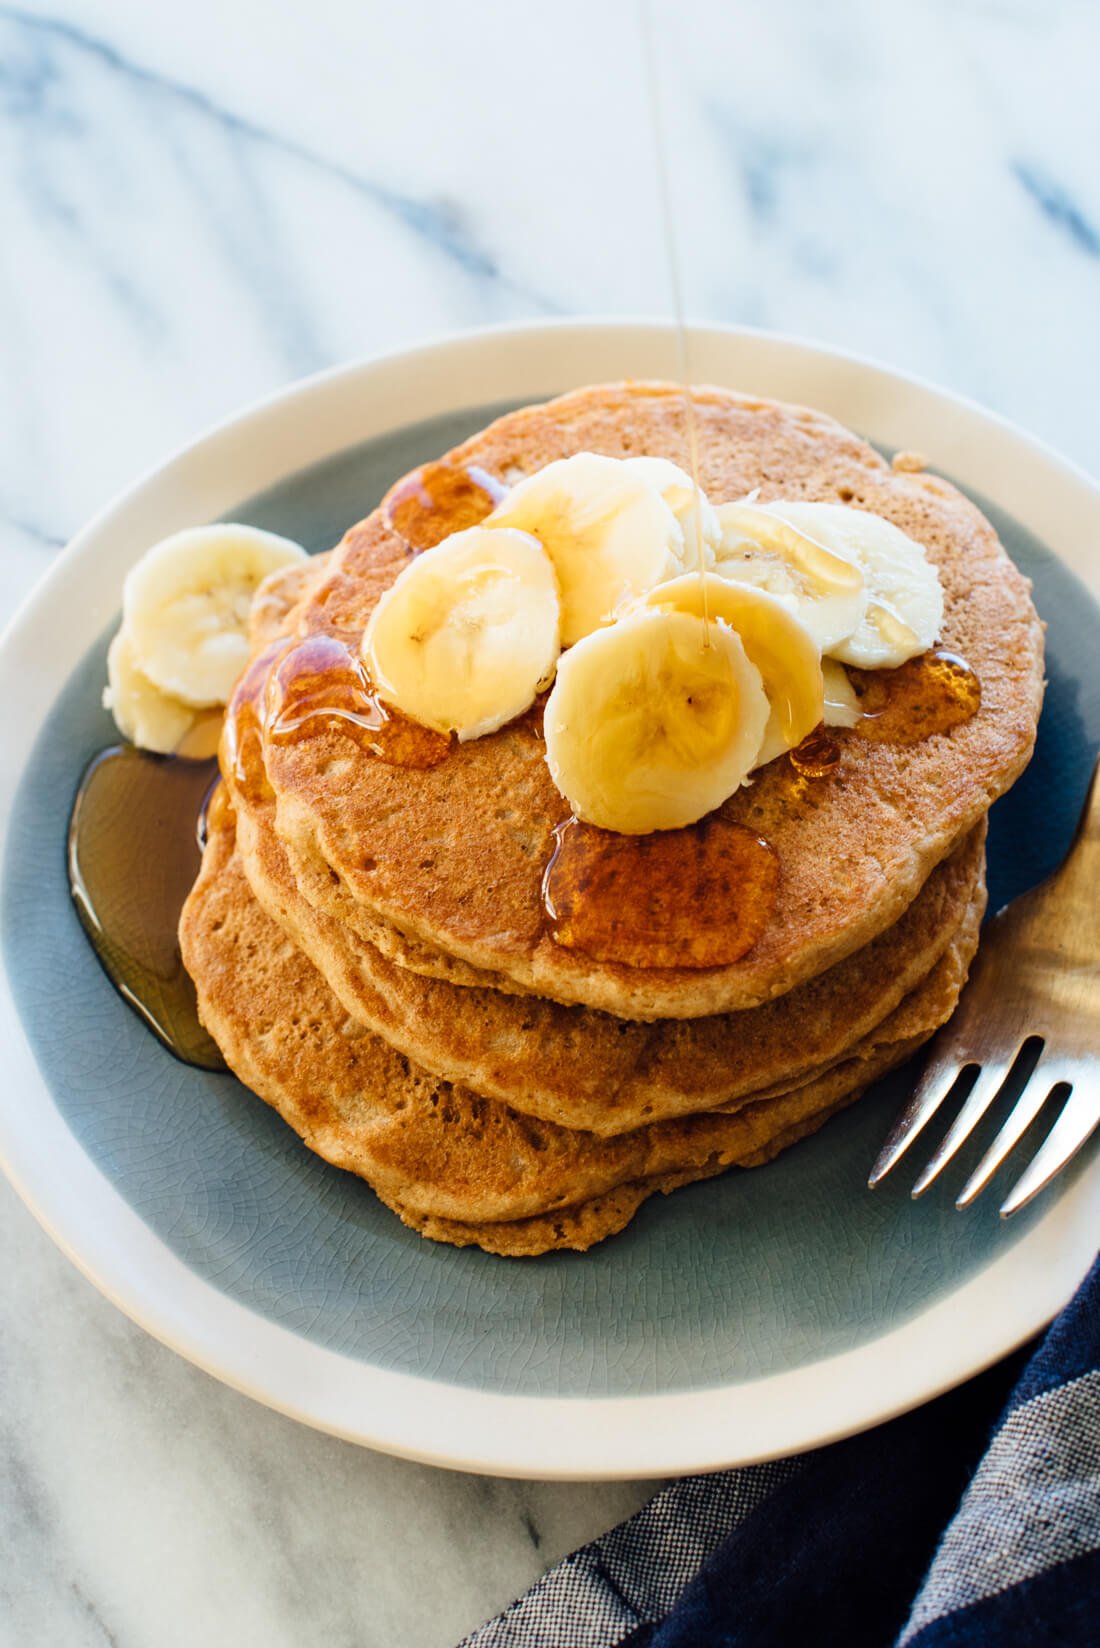 Seriously delicious 100% wheat pancakes recipe! They're naturally sweetened with maple syrup, too.